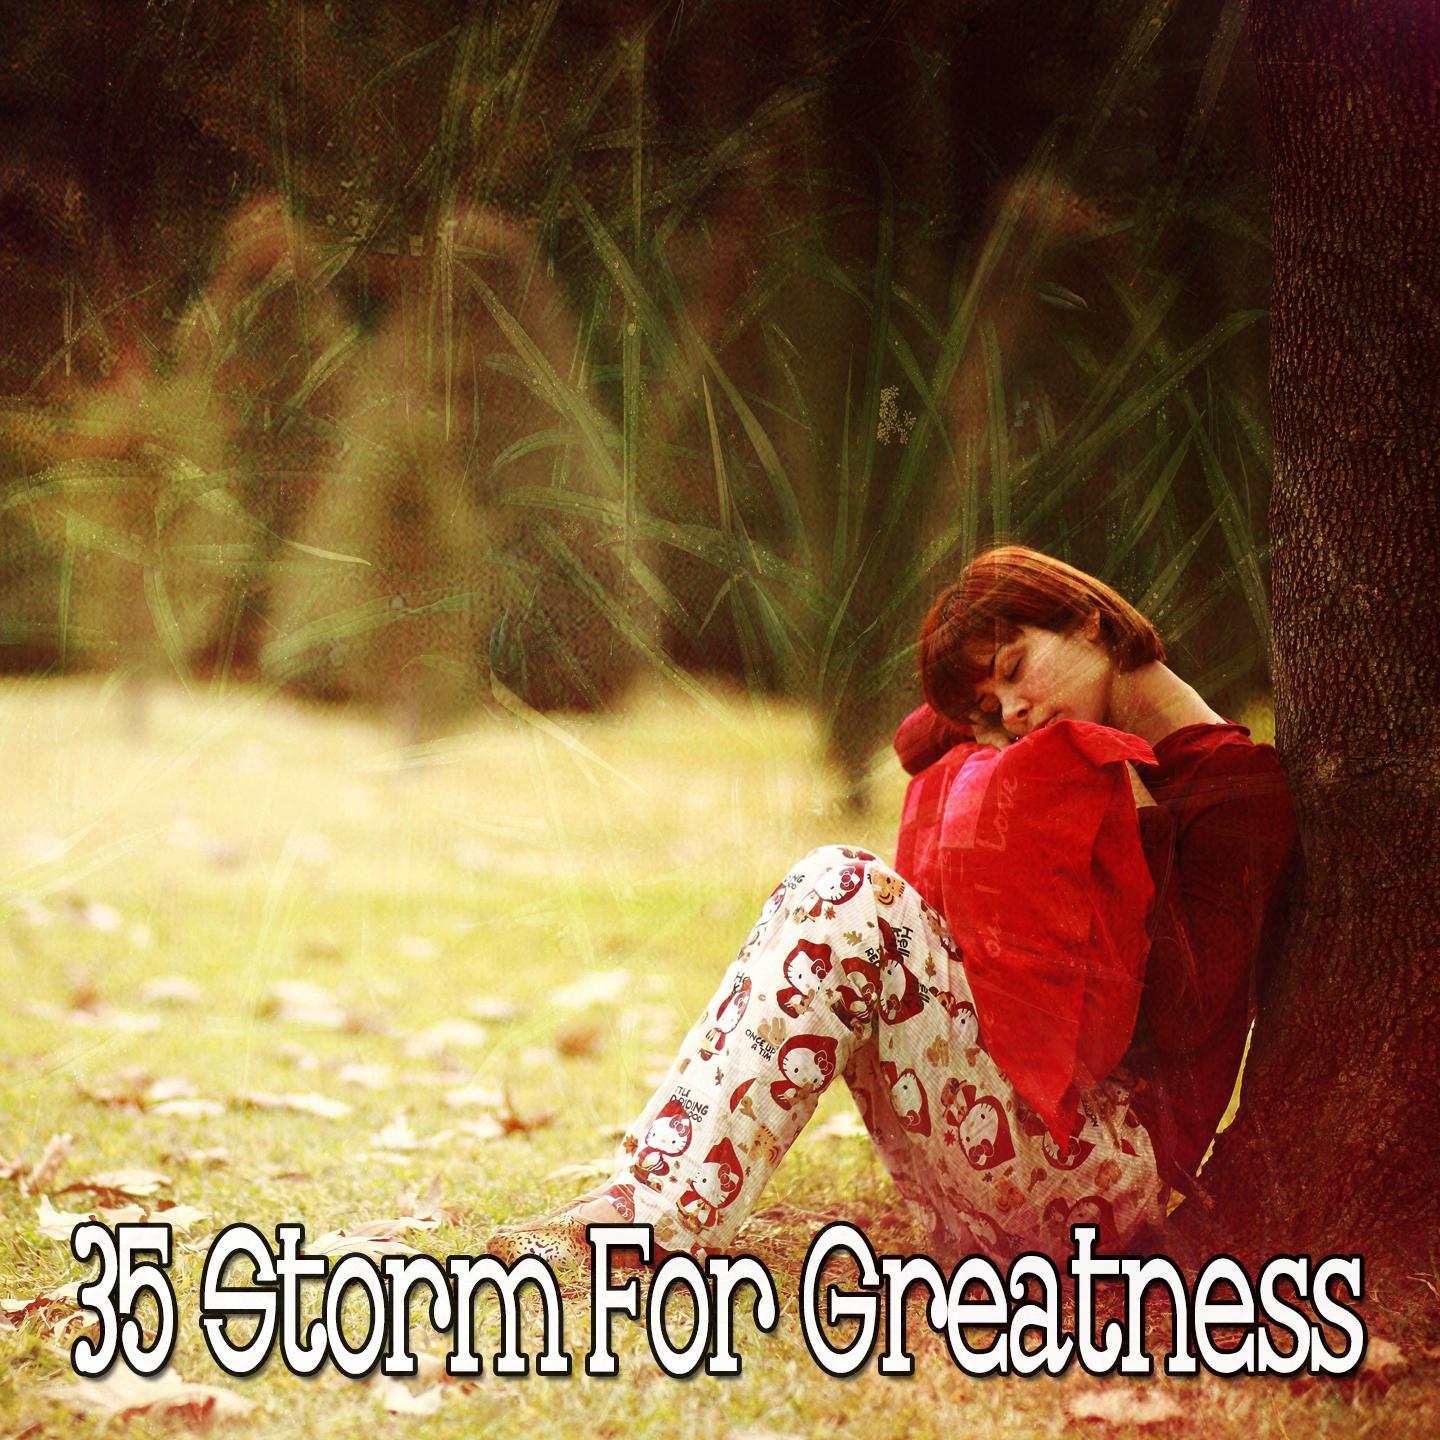 35 Storm for Greatness